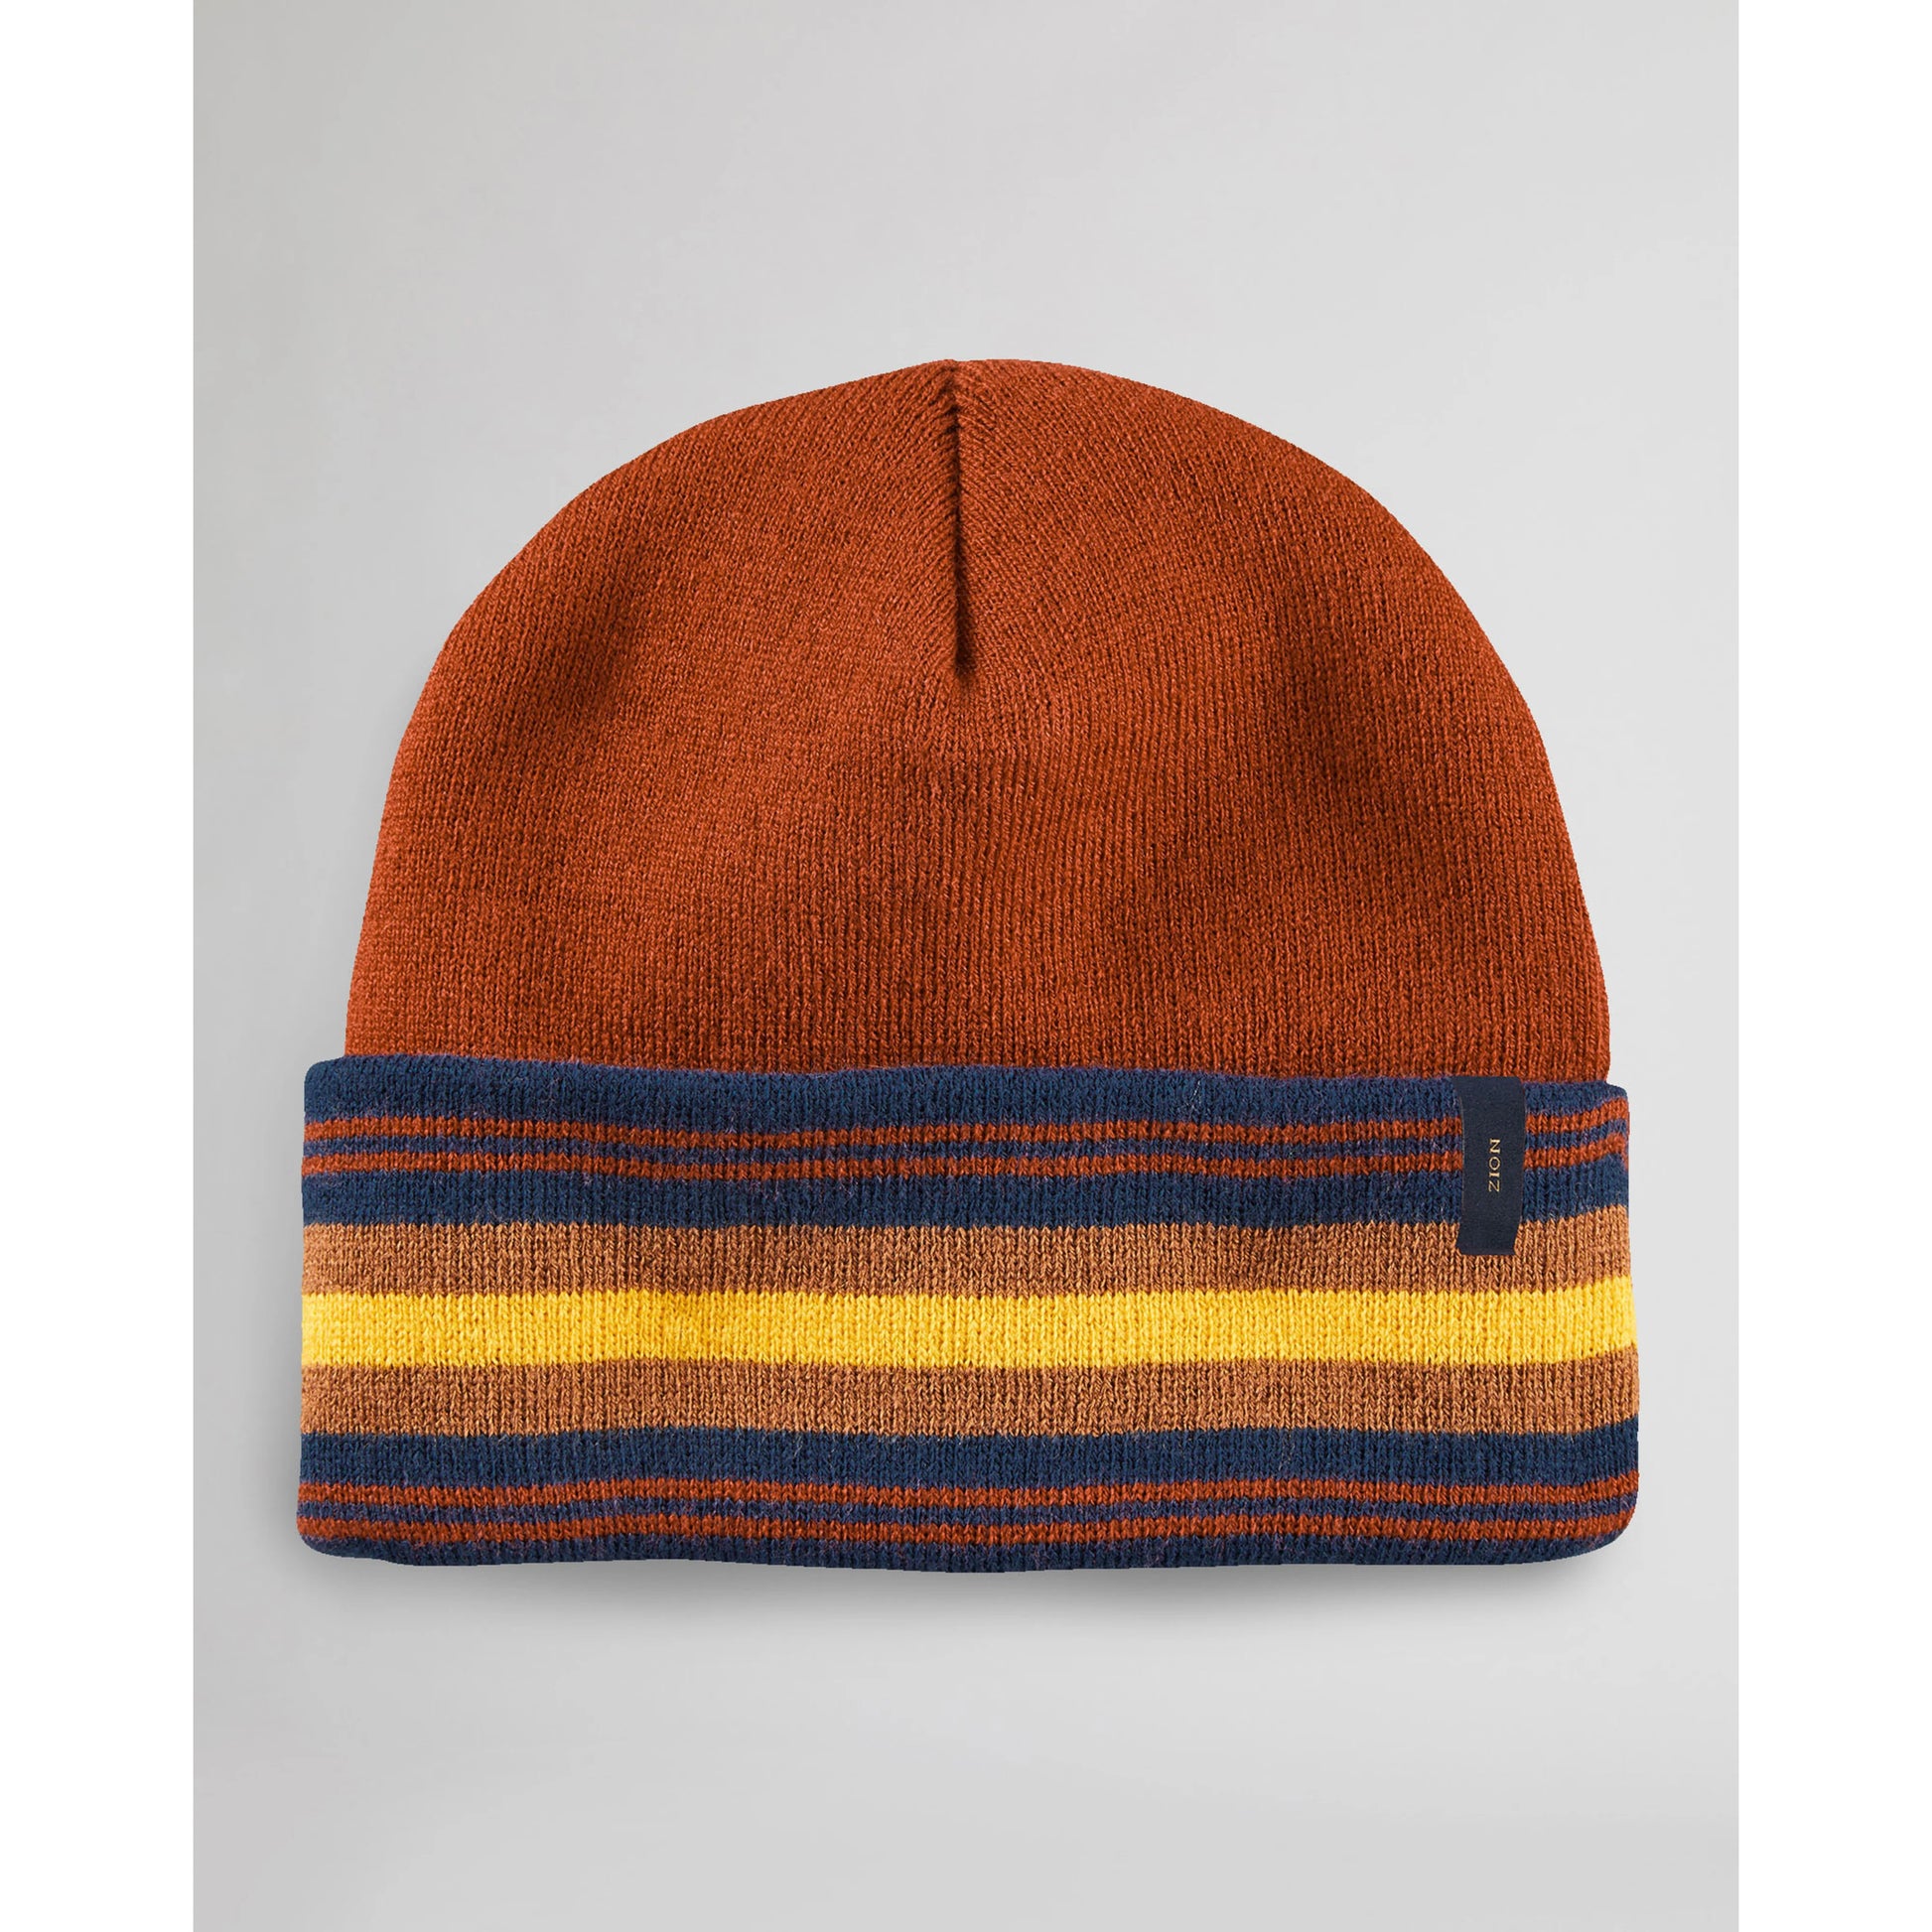 Beanie Hat, soft stretchy ribbed knit, rust with yellow/blue/rust stripes